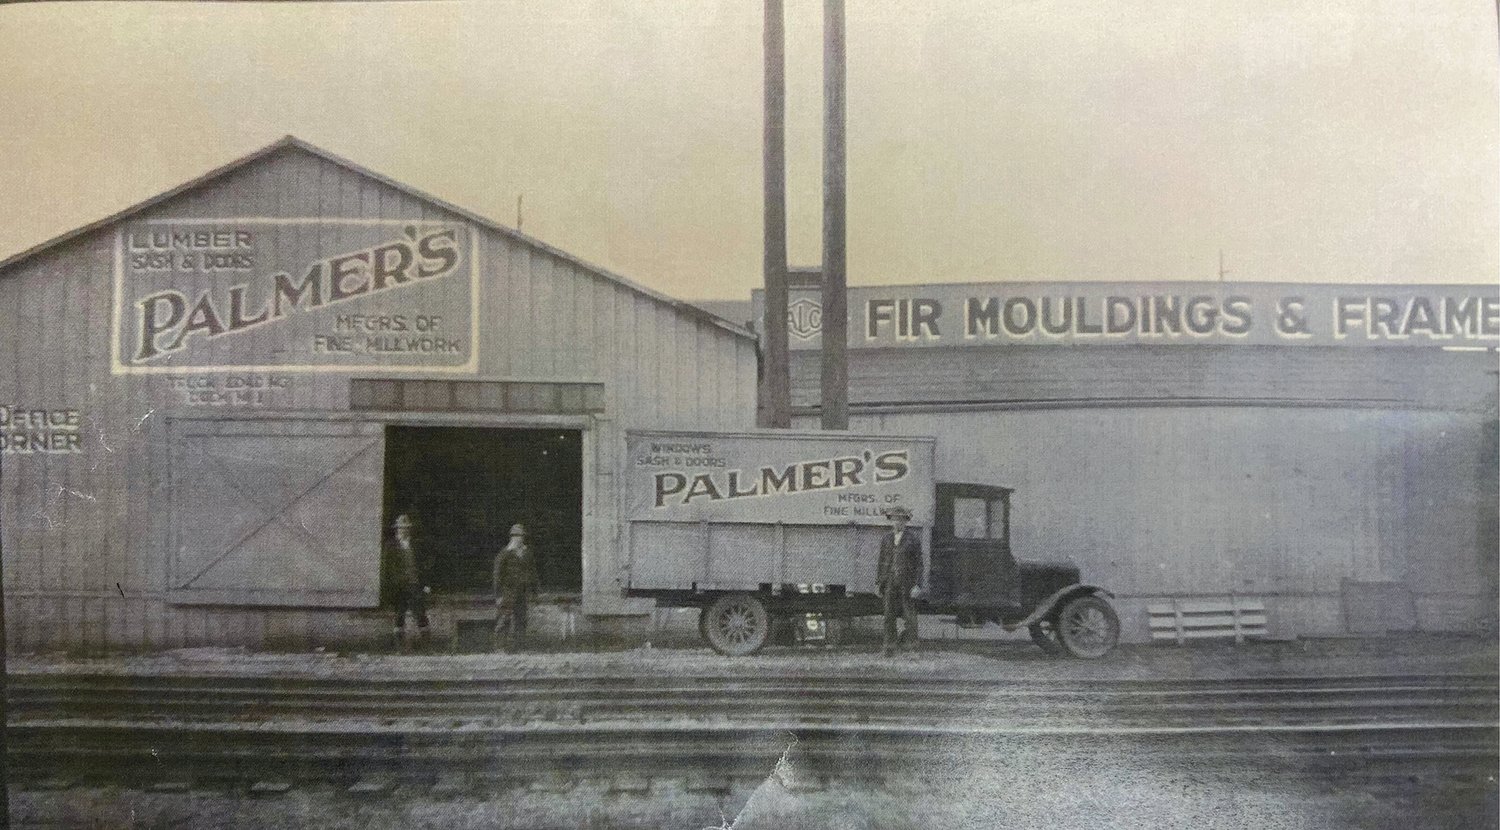 The partnership between Experience Chehalis and Palmer Lumber requests that folks come up with mural designs that incorporate a likeness of this historic image of Palmer Lumber’s operations.